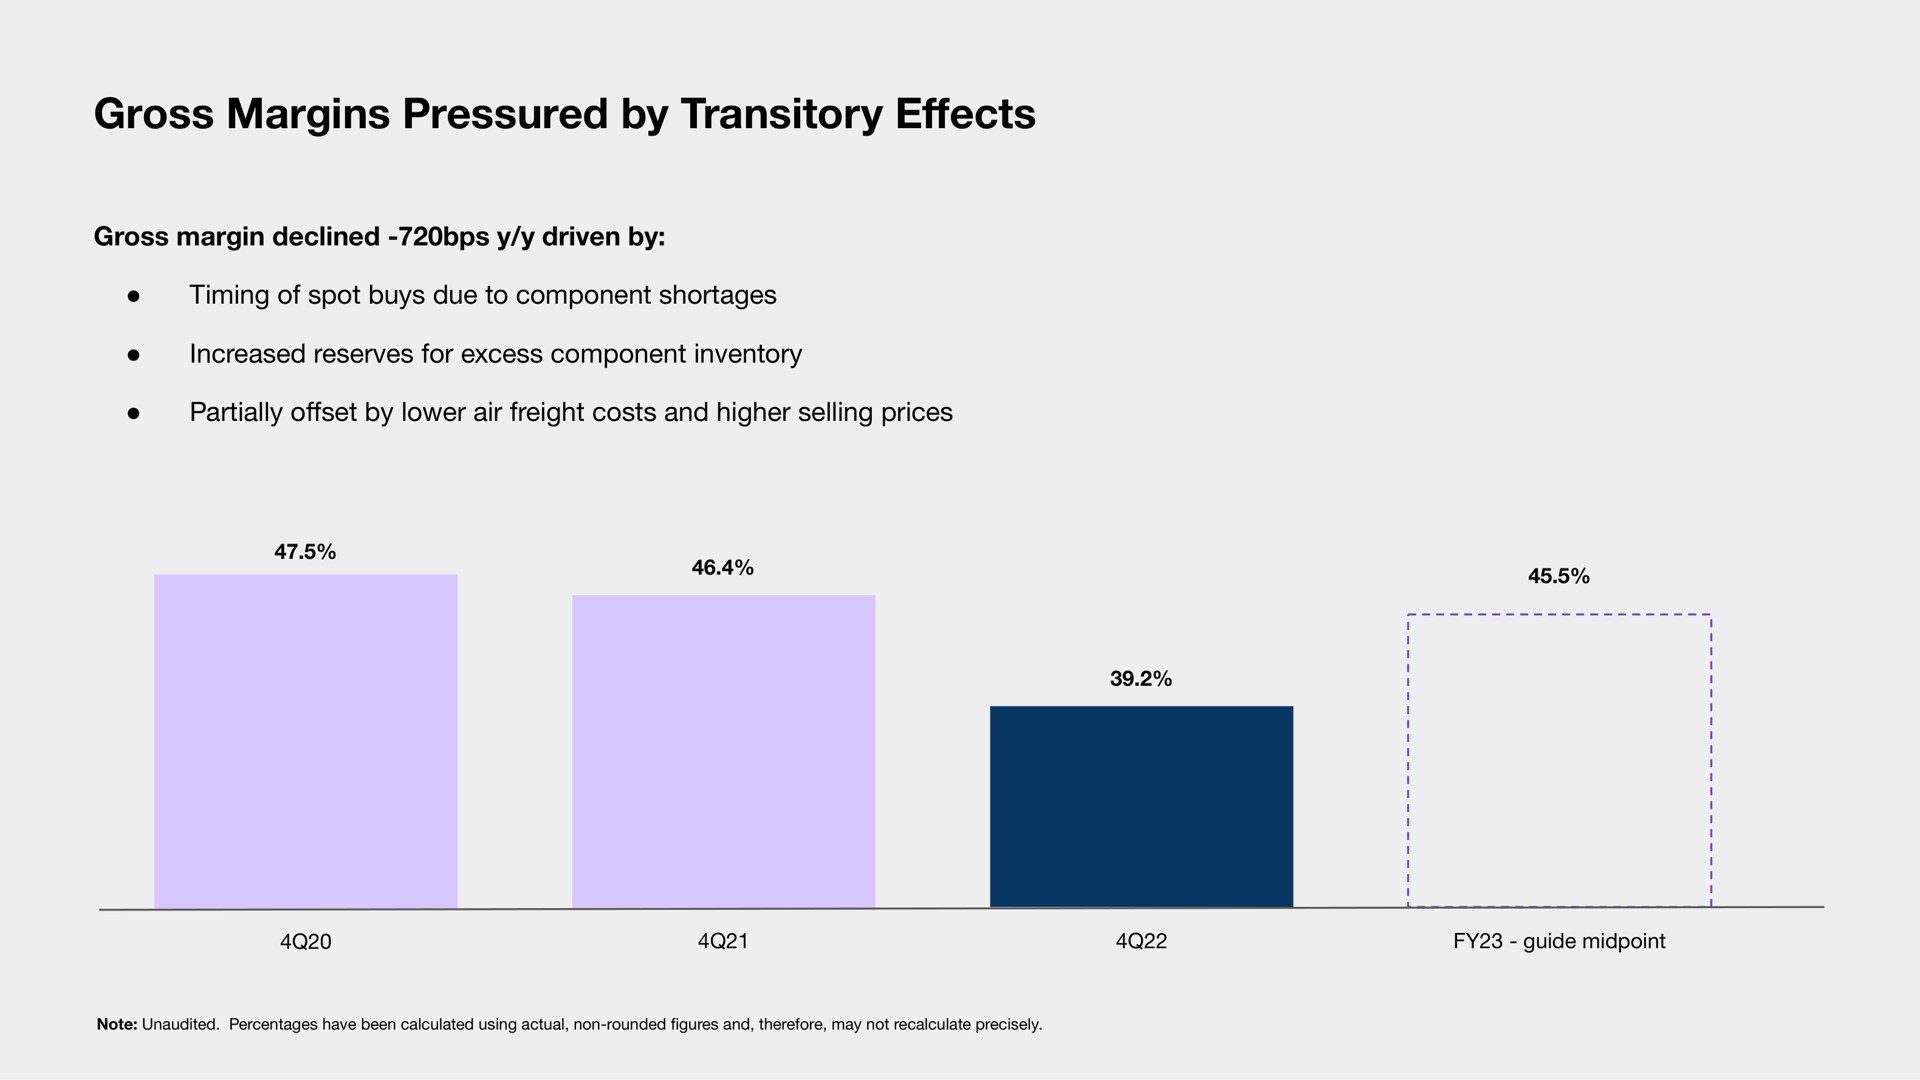 gross margins pressured by transitory effects | Sonos